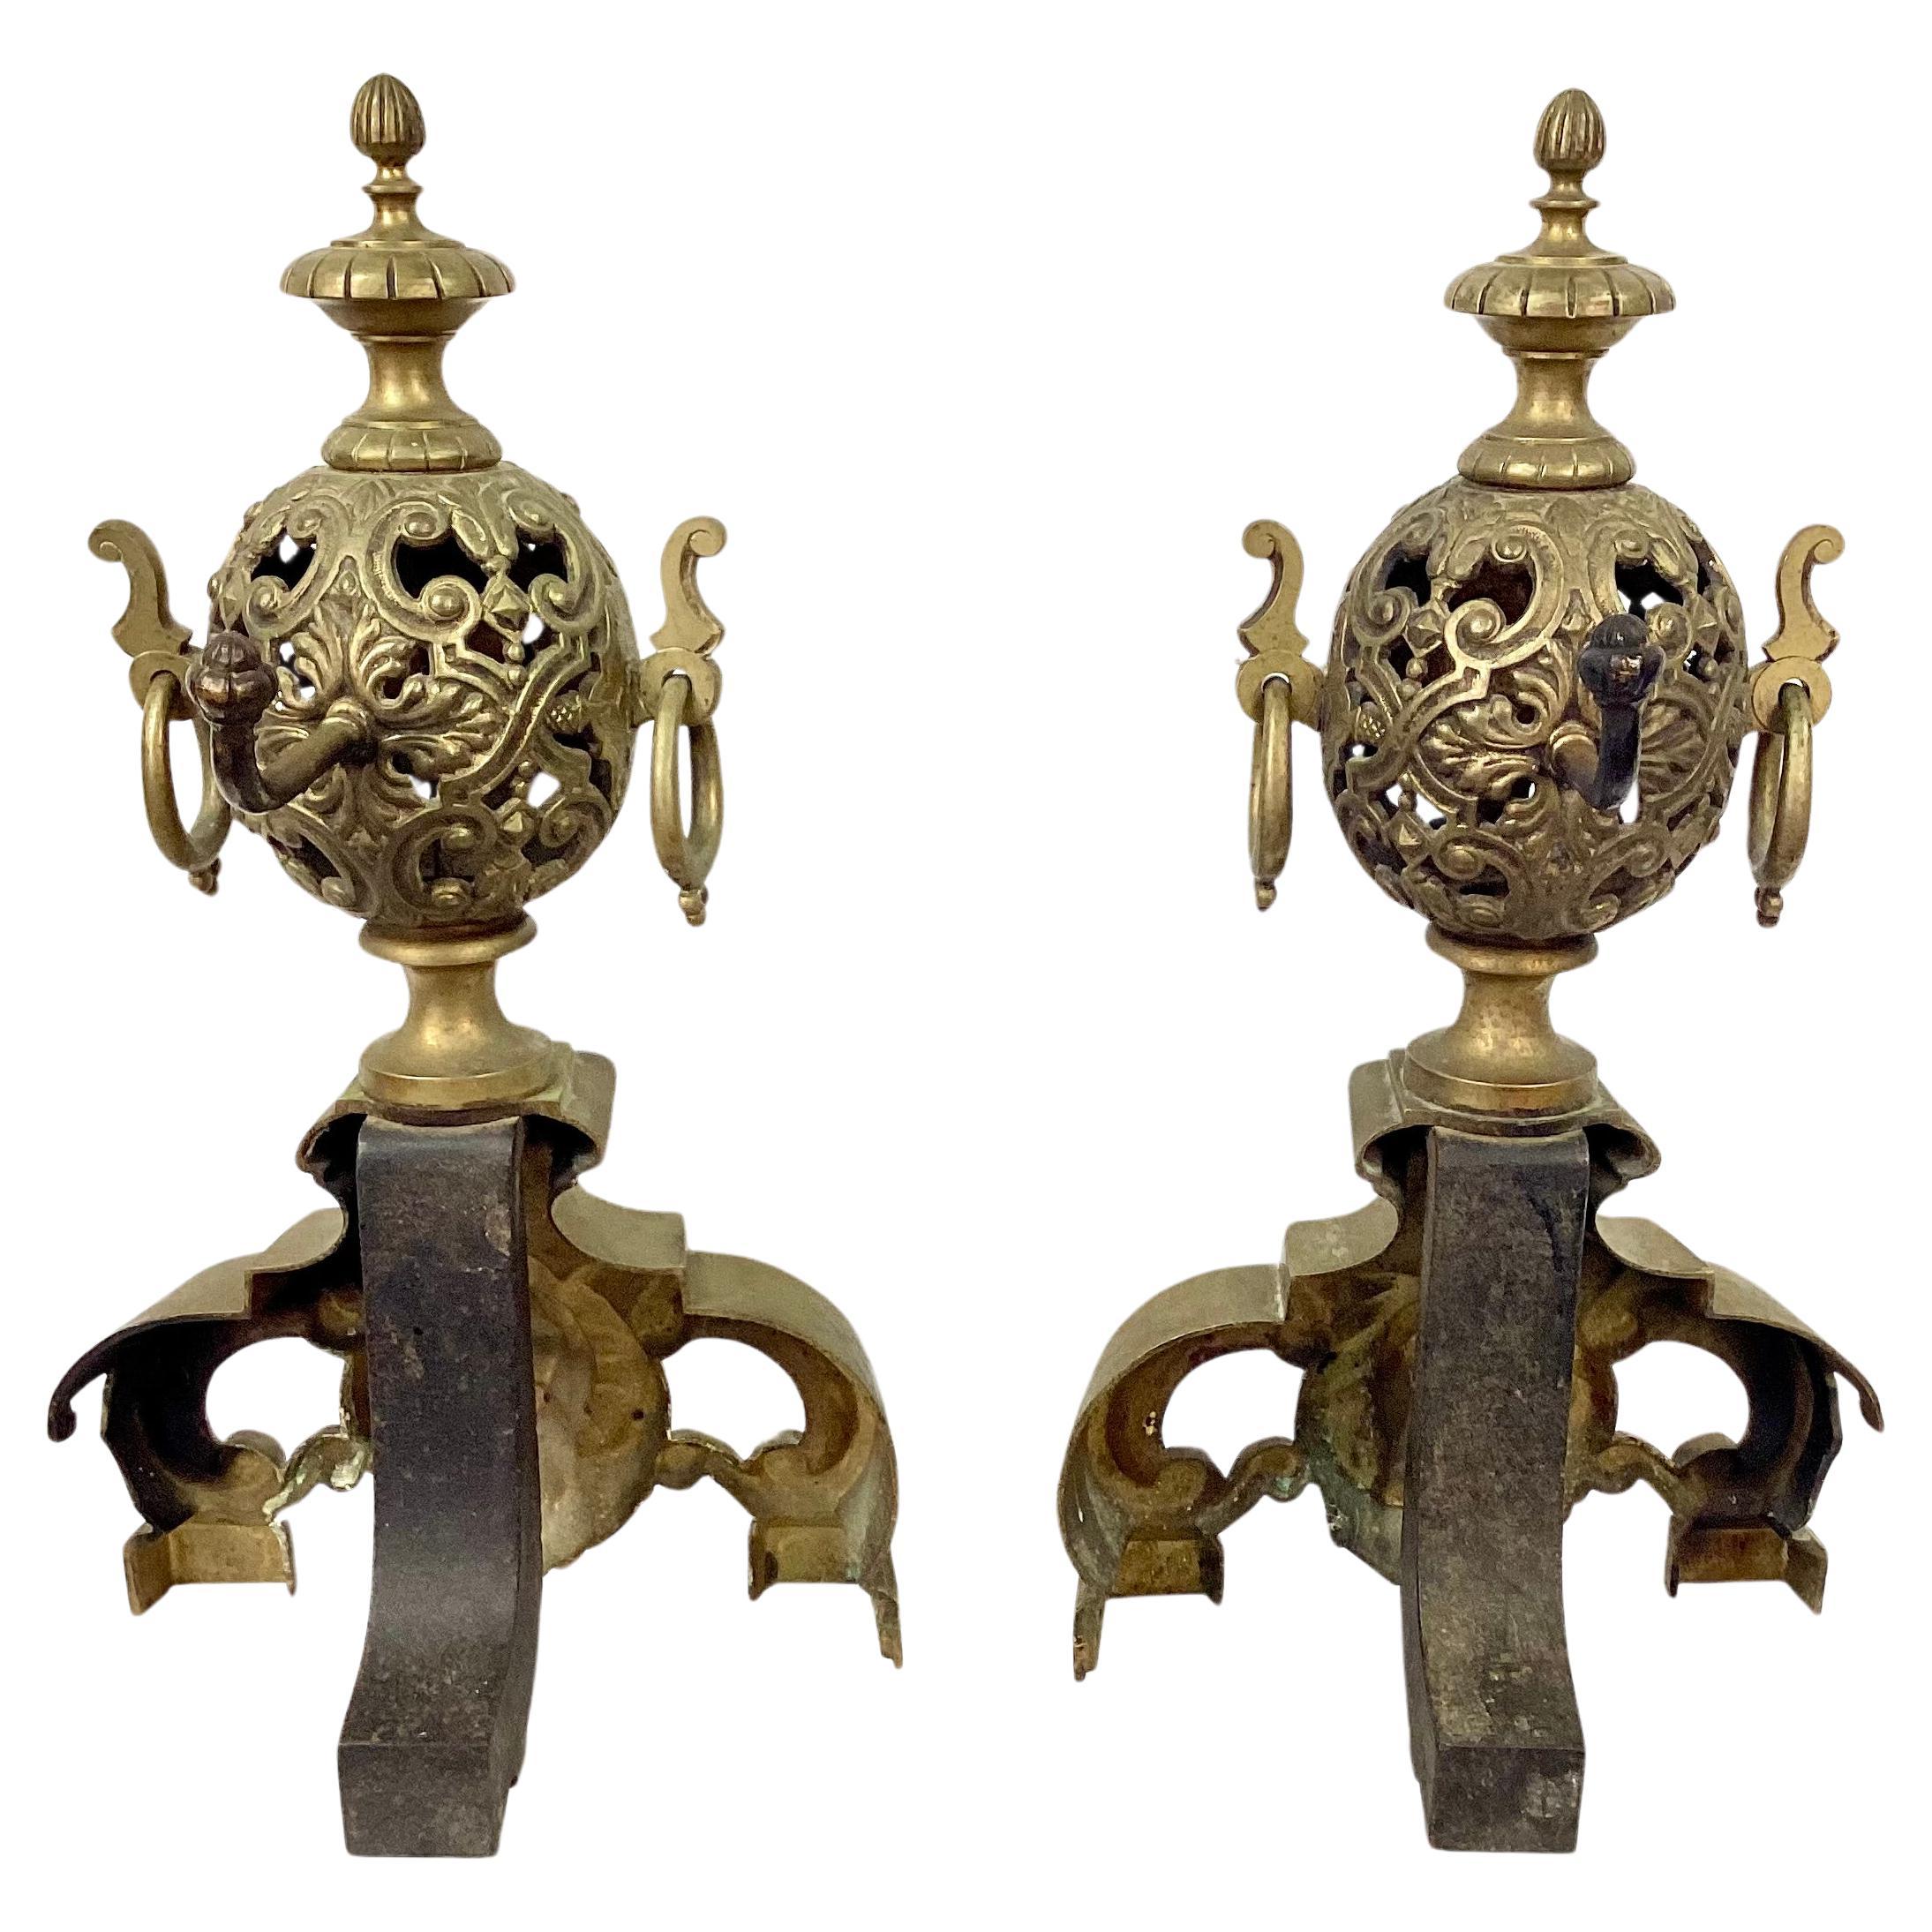 Great looking pair of late 19th century Lion's Head Andirons. Each features ornate designs on upper round shaped orbs and stunning brass lion's head crests in the bottom center.  Heavy brass has a wonderful old patina. 